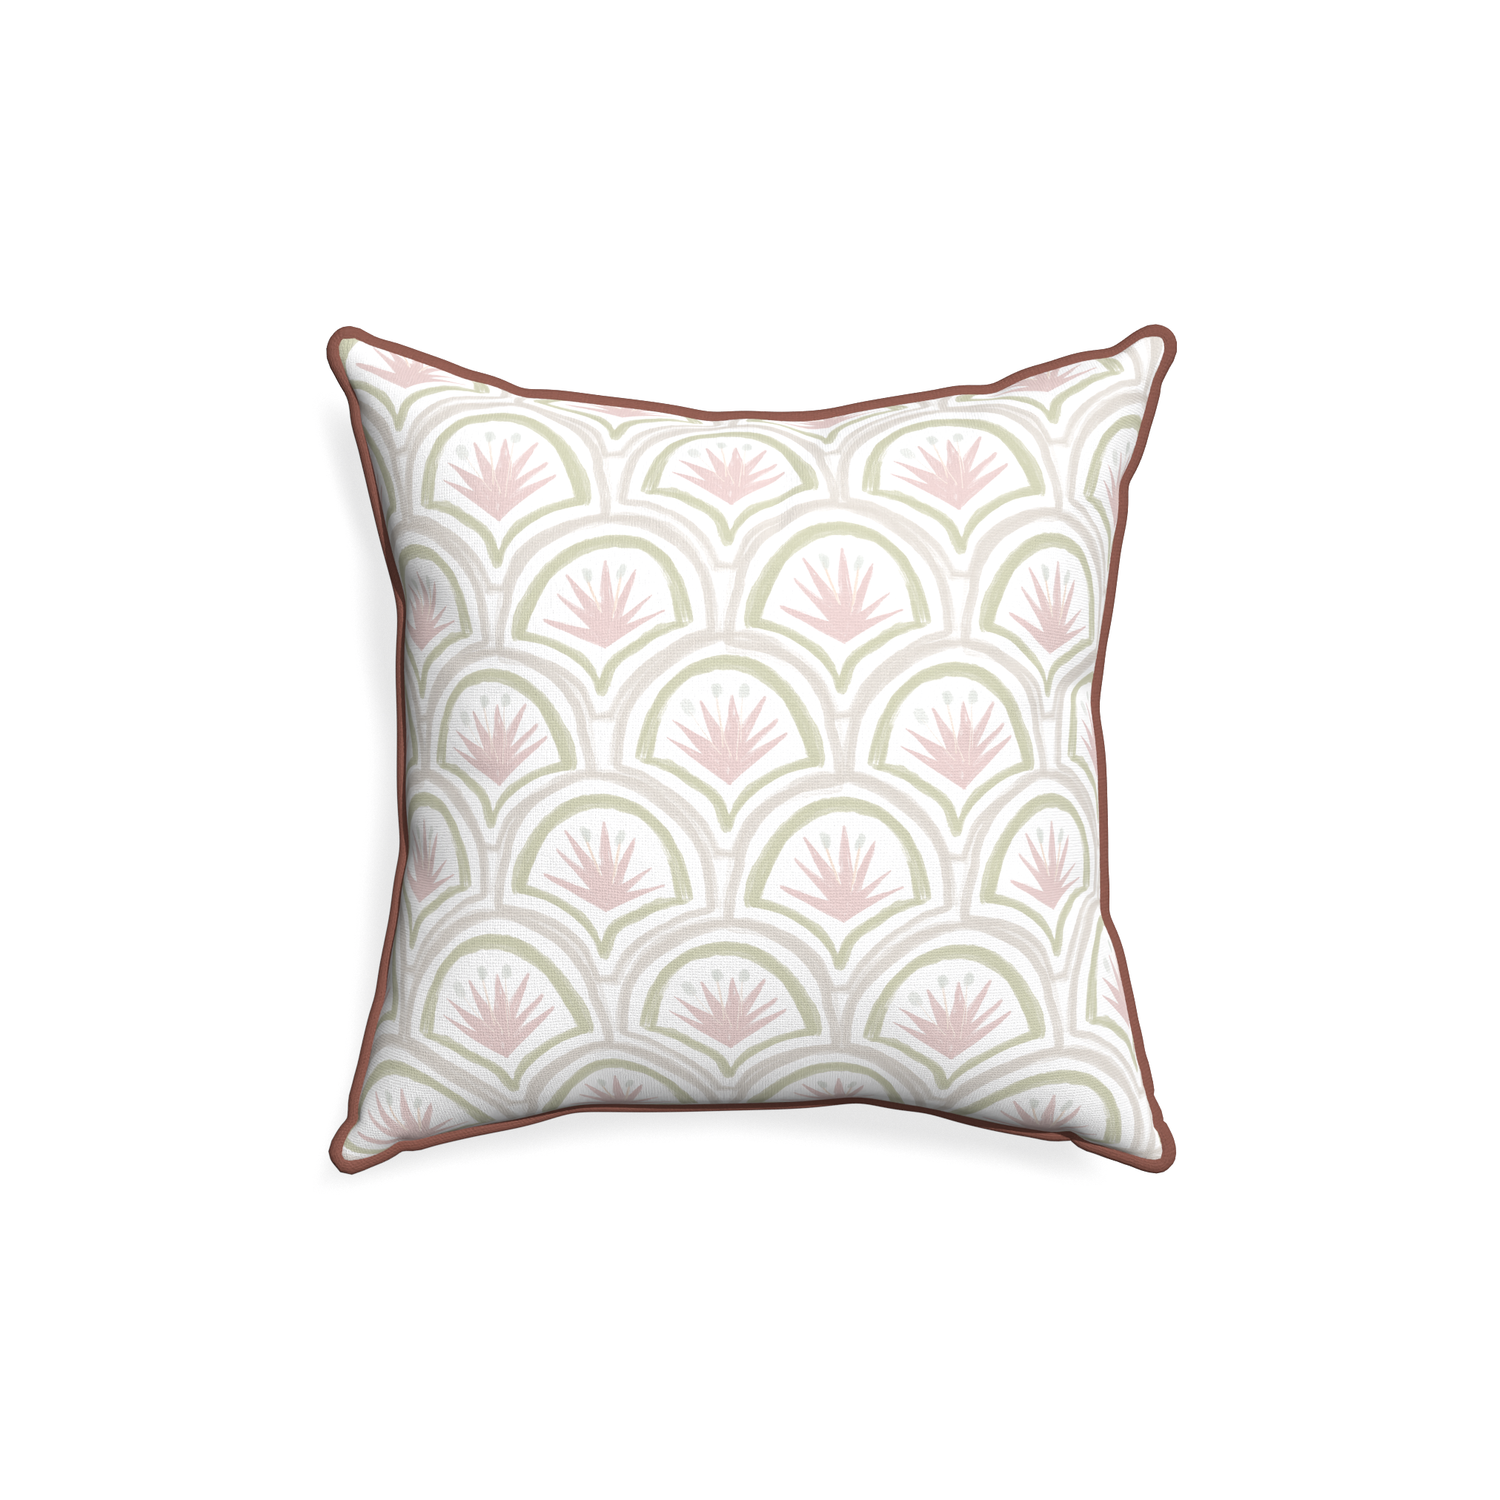 18-square thatcher rose custom pillow with w piping on white background